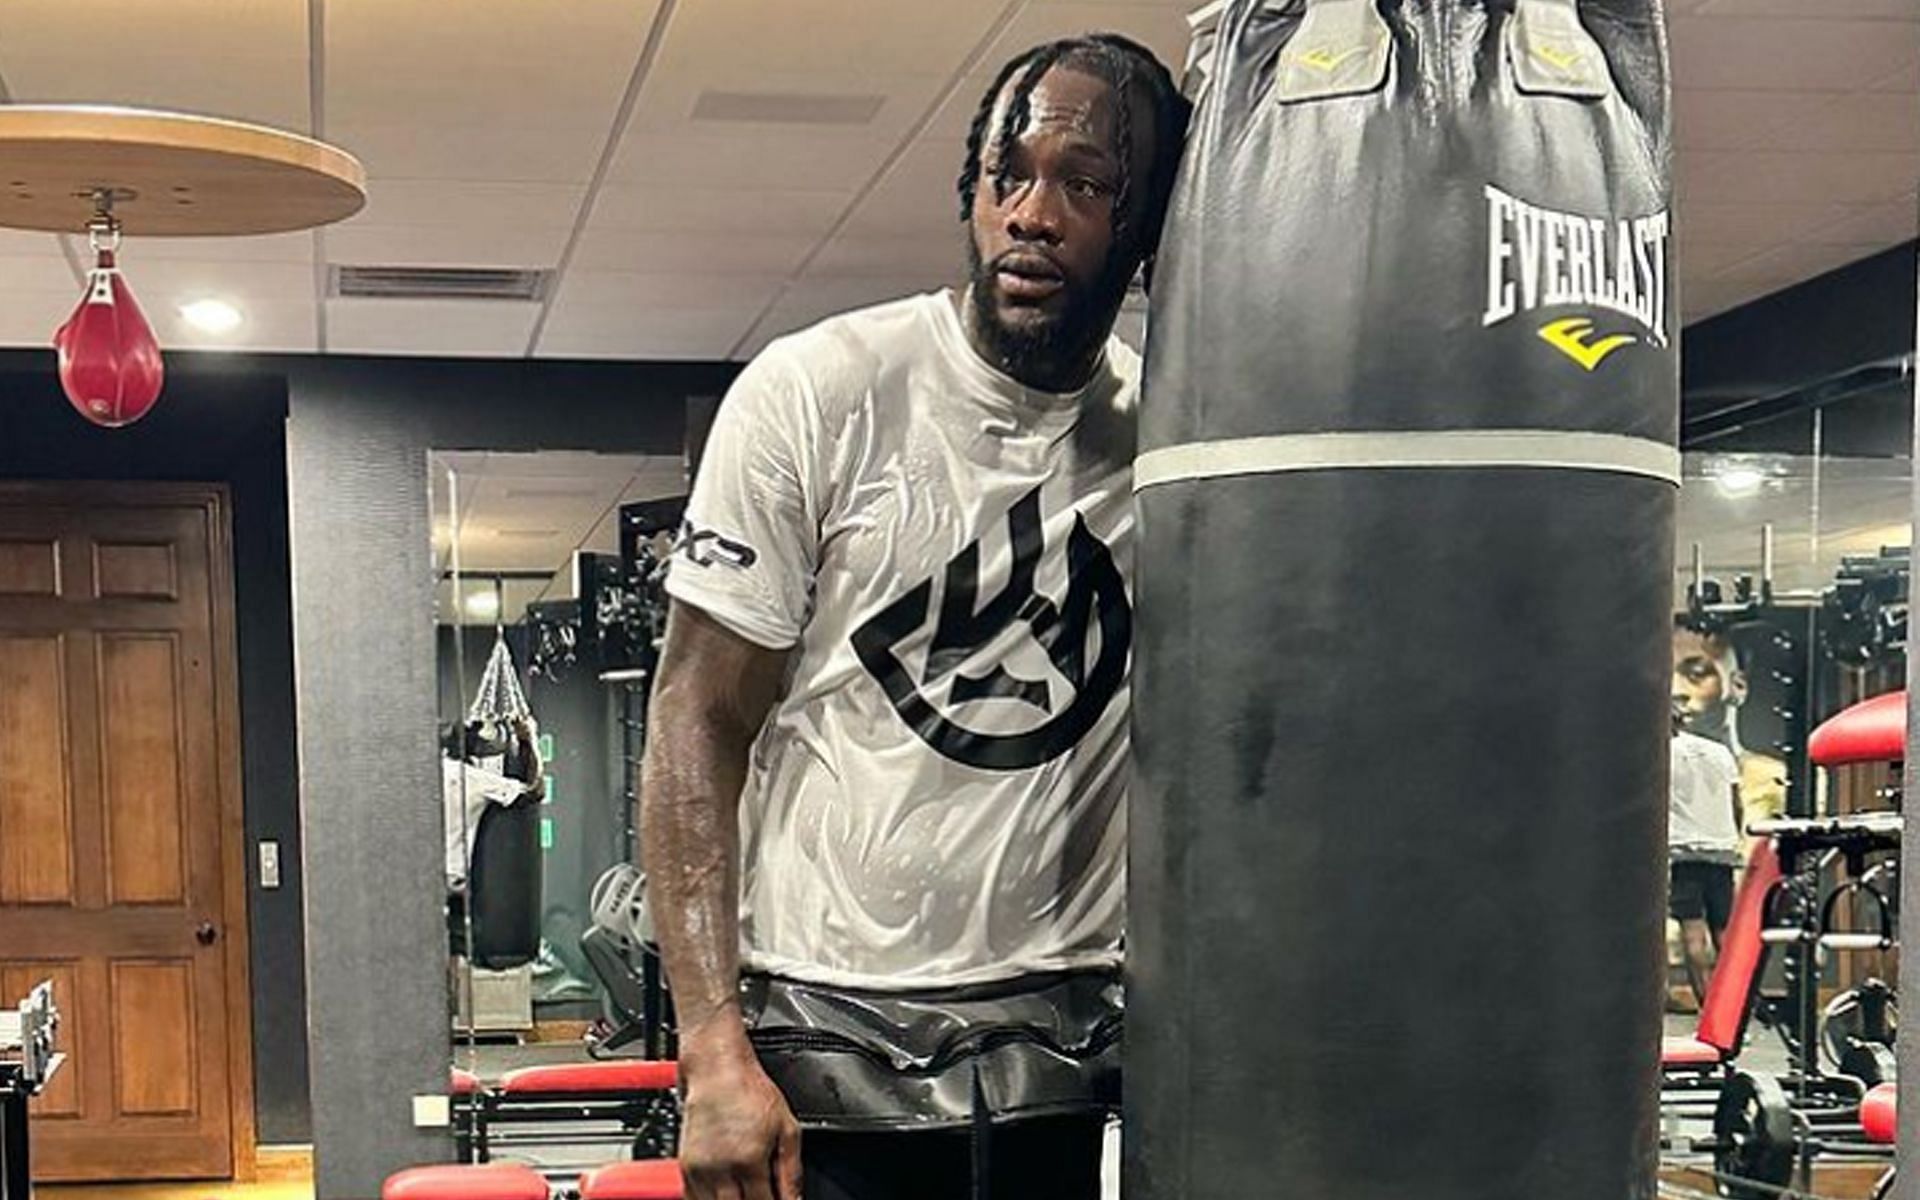 Deontay Wilder clarified his stance on retirement after Joseph Parker loss (Image Courtesy: @bronzebomber Instagram)